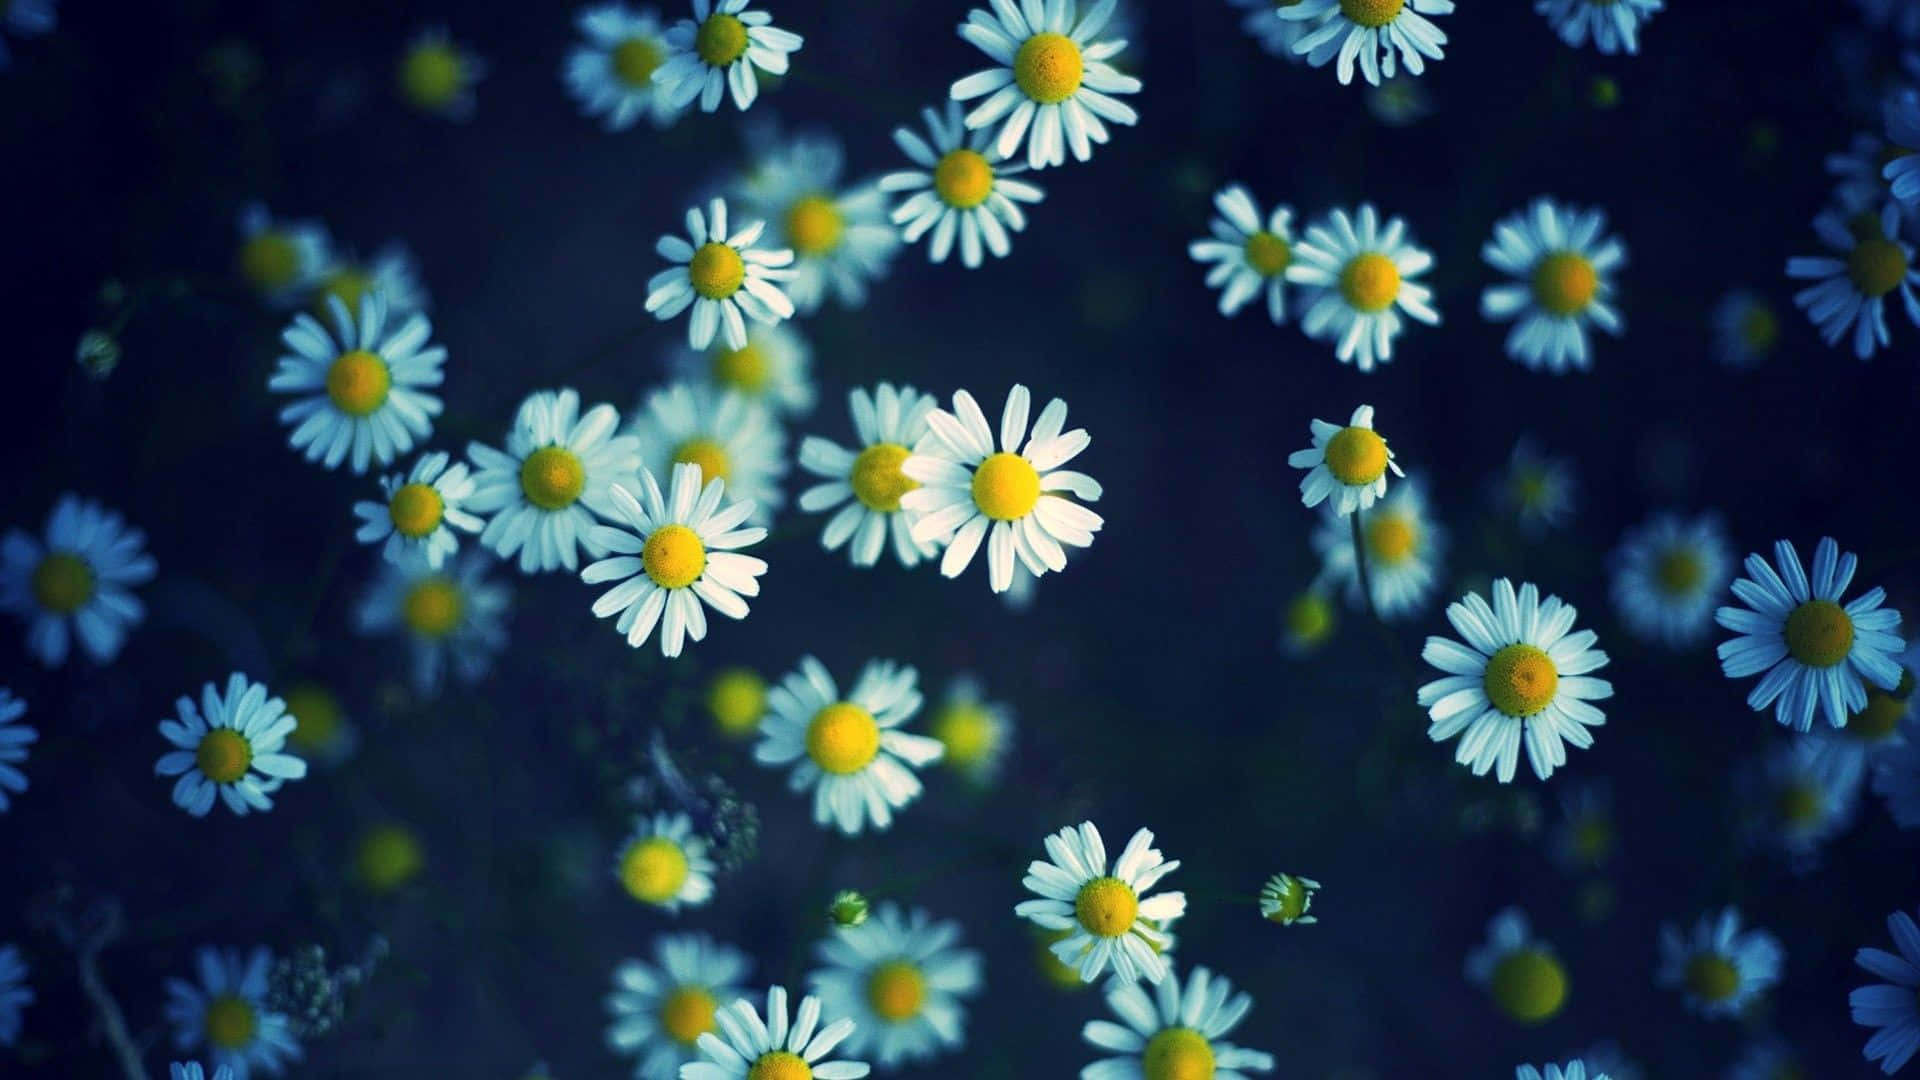 Aesthetic White Daisy Cute Floral Wallpaper